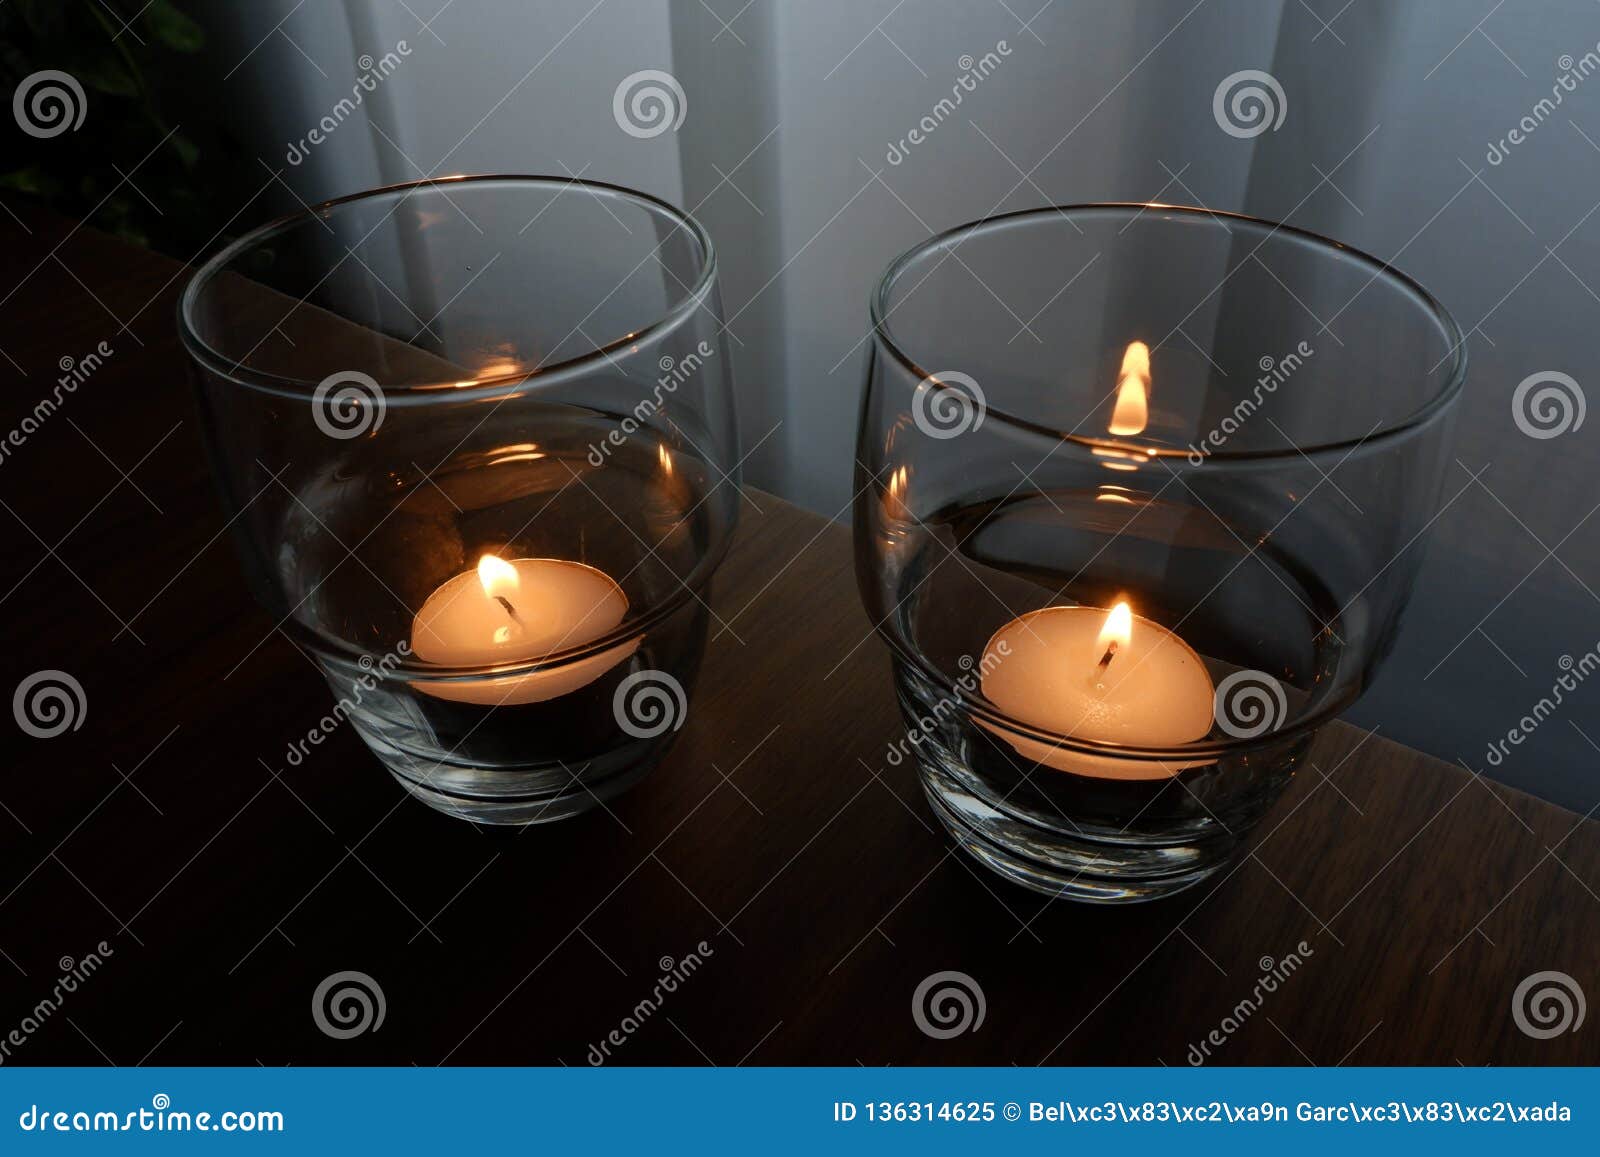 Candles For A Warm Illumination Stock Image - Image of candles, antique ...